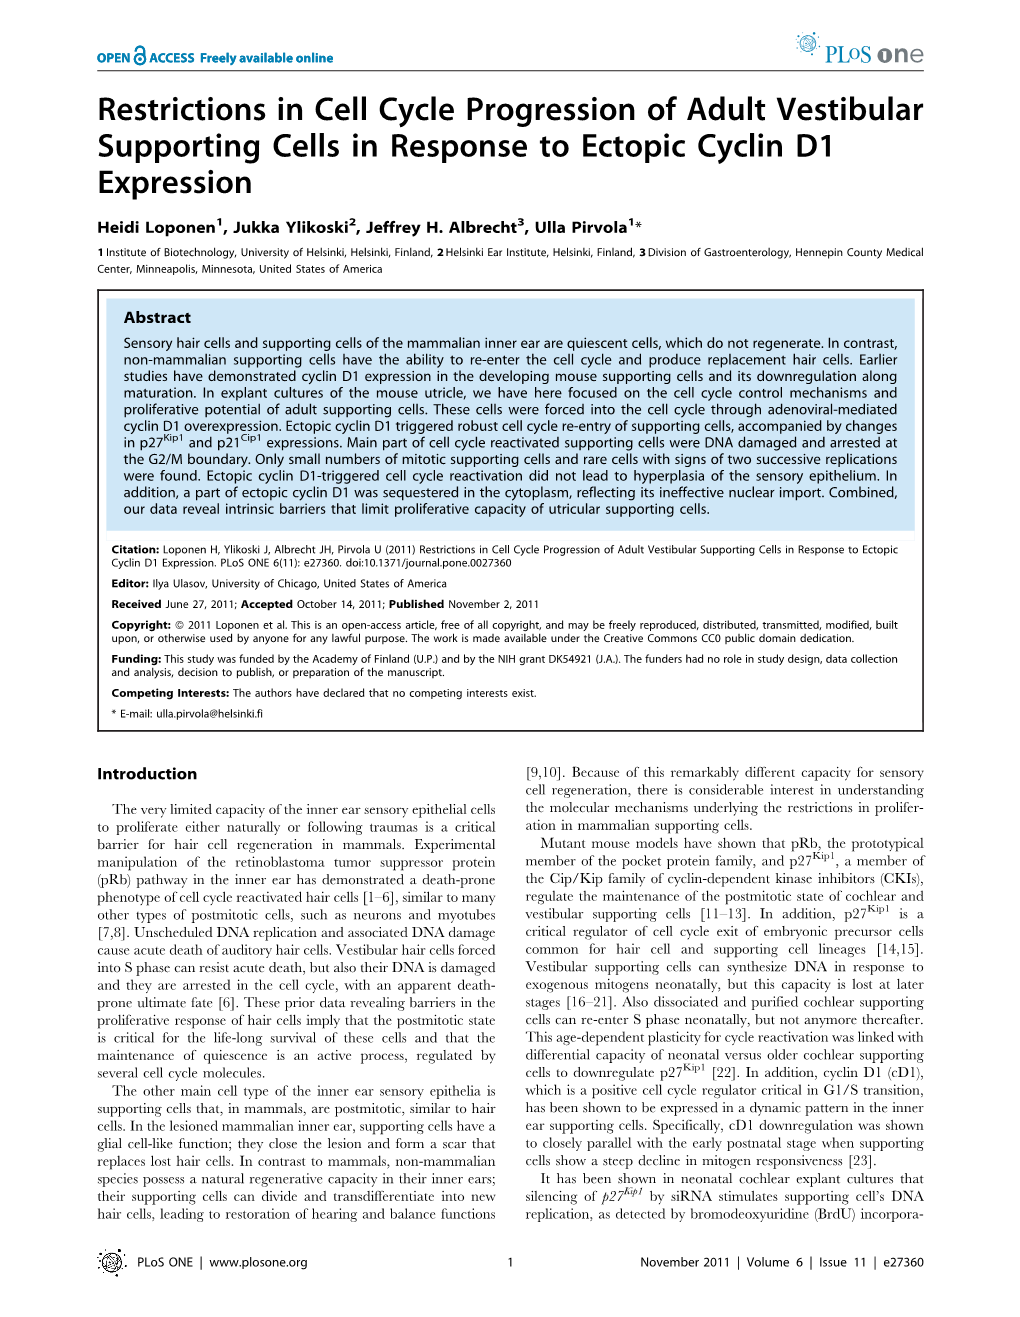 Restrictions in Cell Cycle Progression of Adult Vestibular Supporting Cells in Response to Ectopic Cyclin D1 Expression